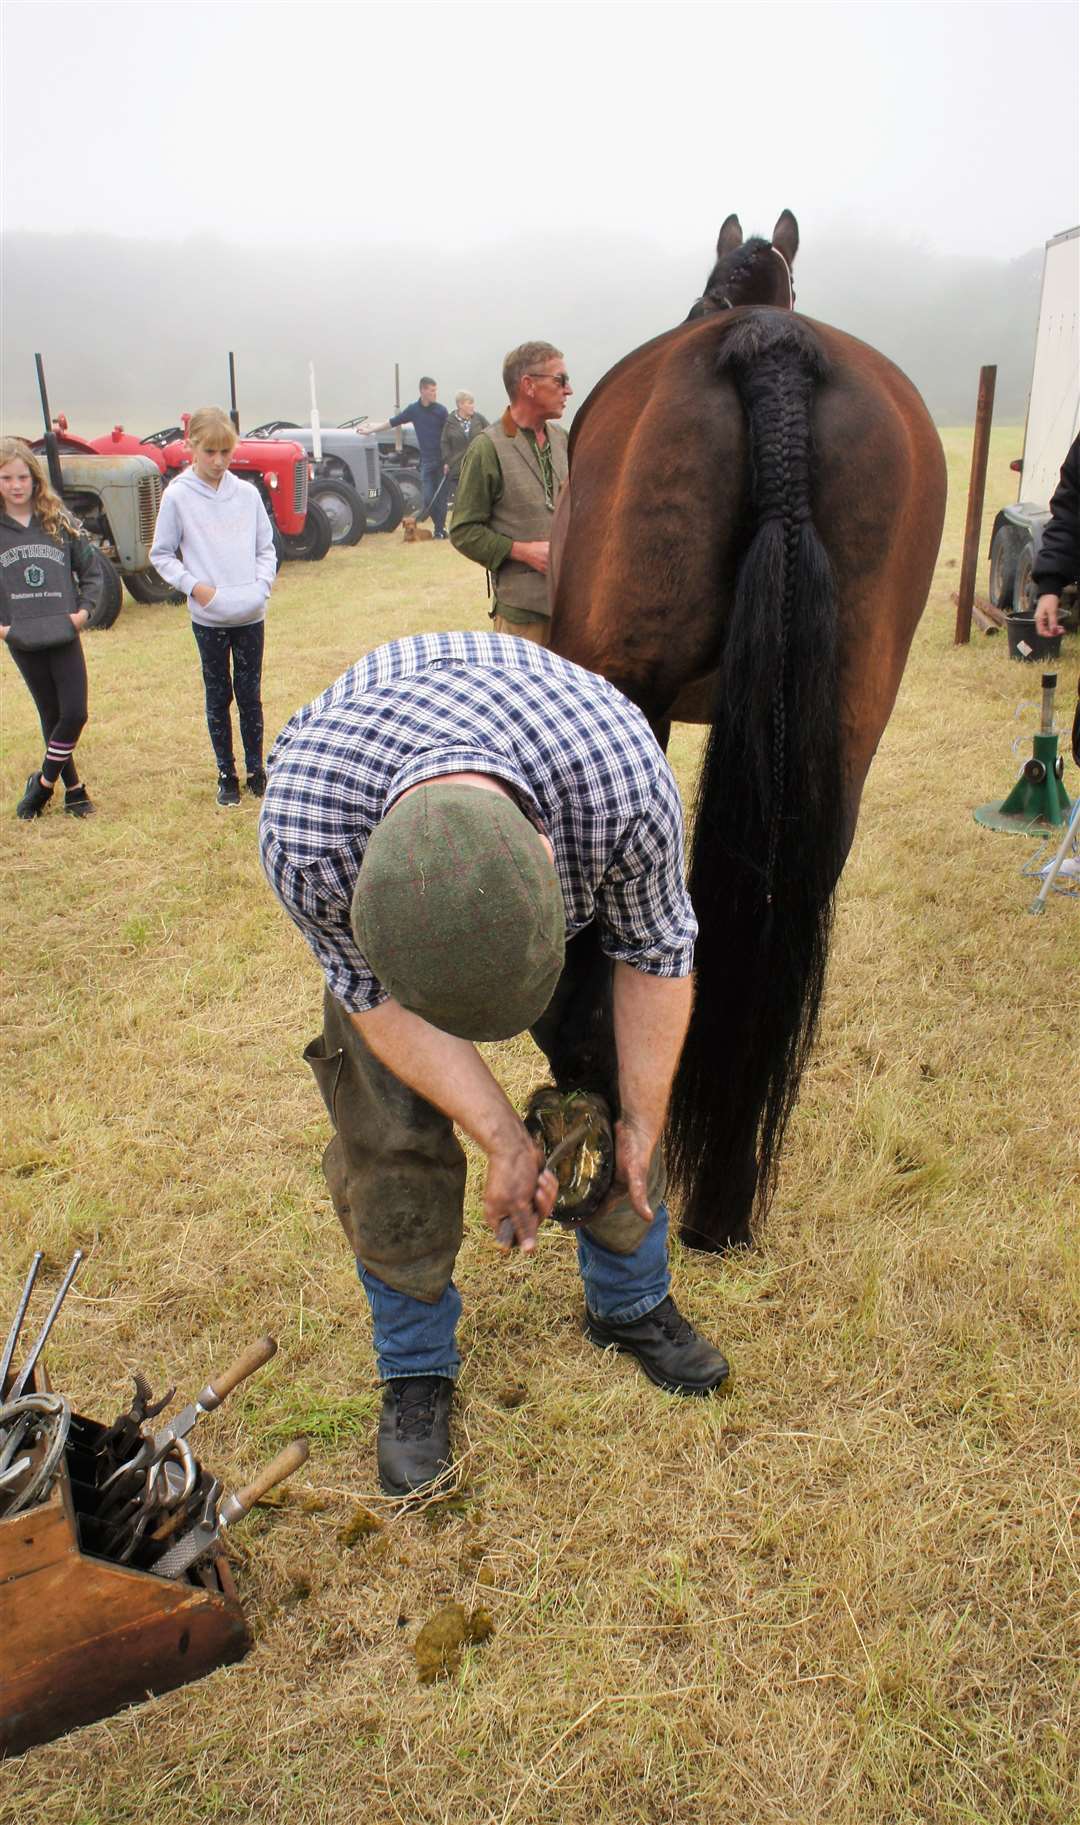 Farrier demonstration by Robby Streight. Picture: DGS